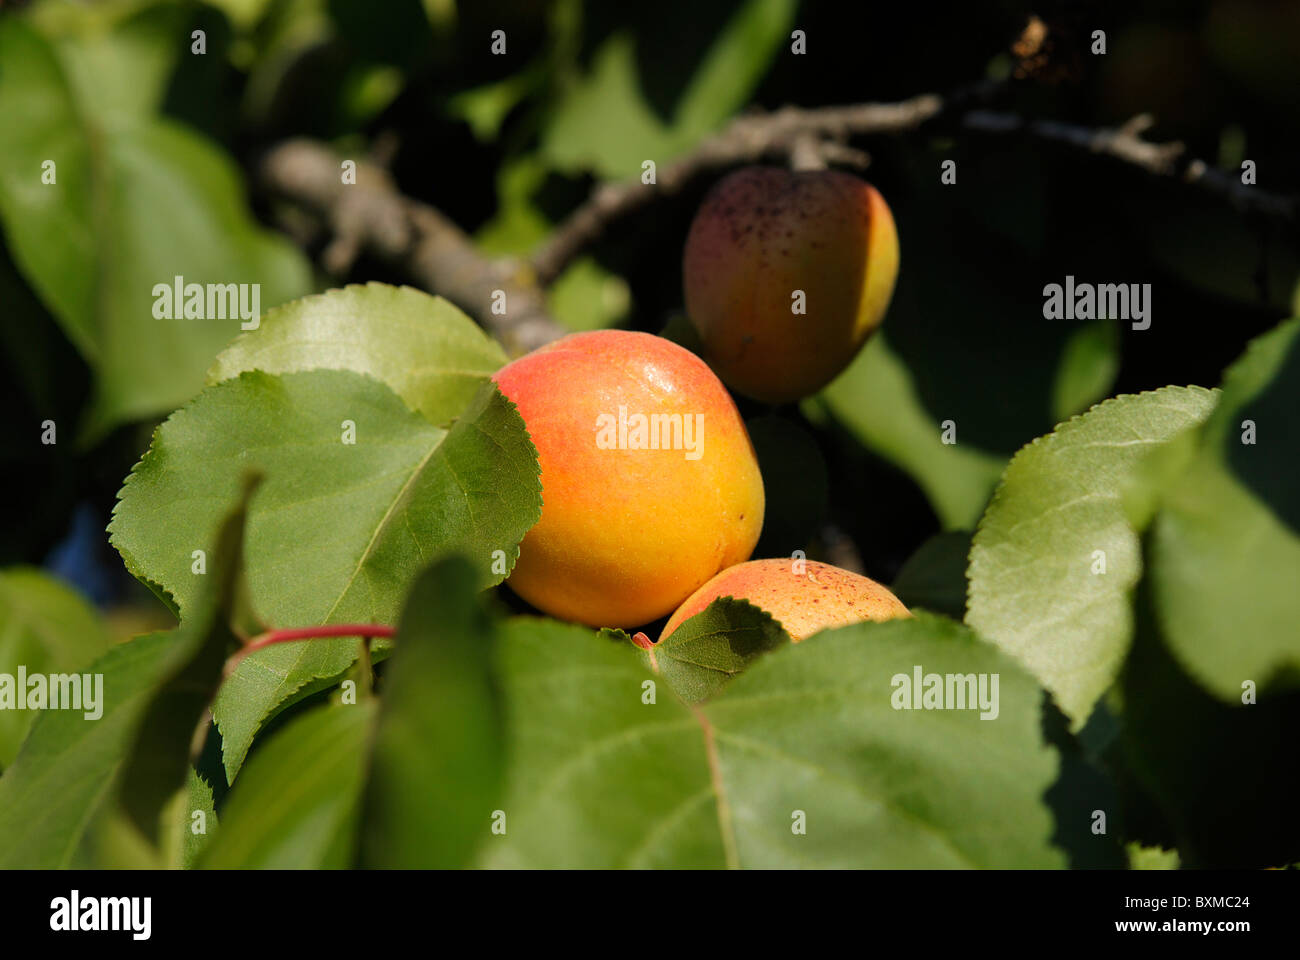 Teoretisk Spis aftensmad bagværk Damascus, fruit in his state of nature, the sheets hedge her in with the  tree Stock Photo - Alamy